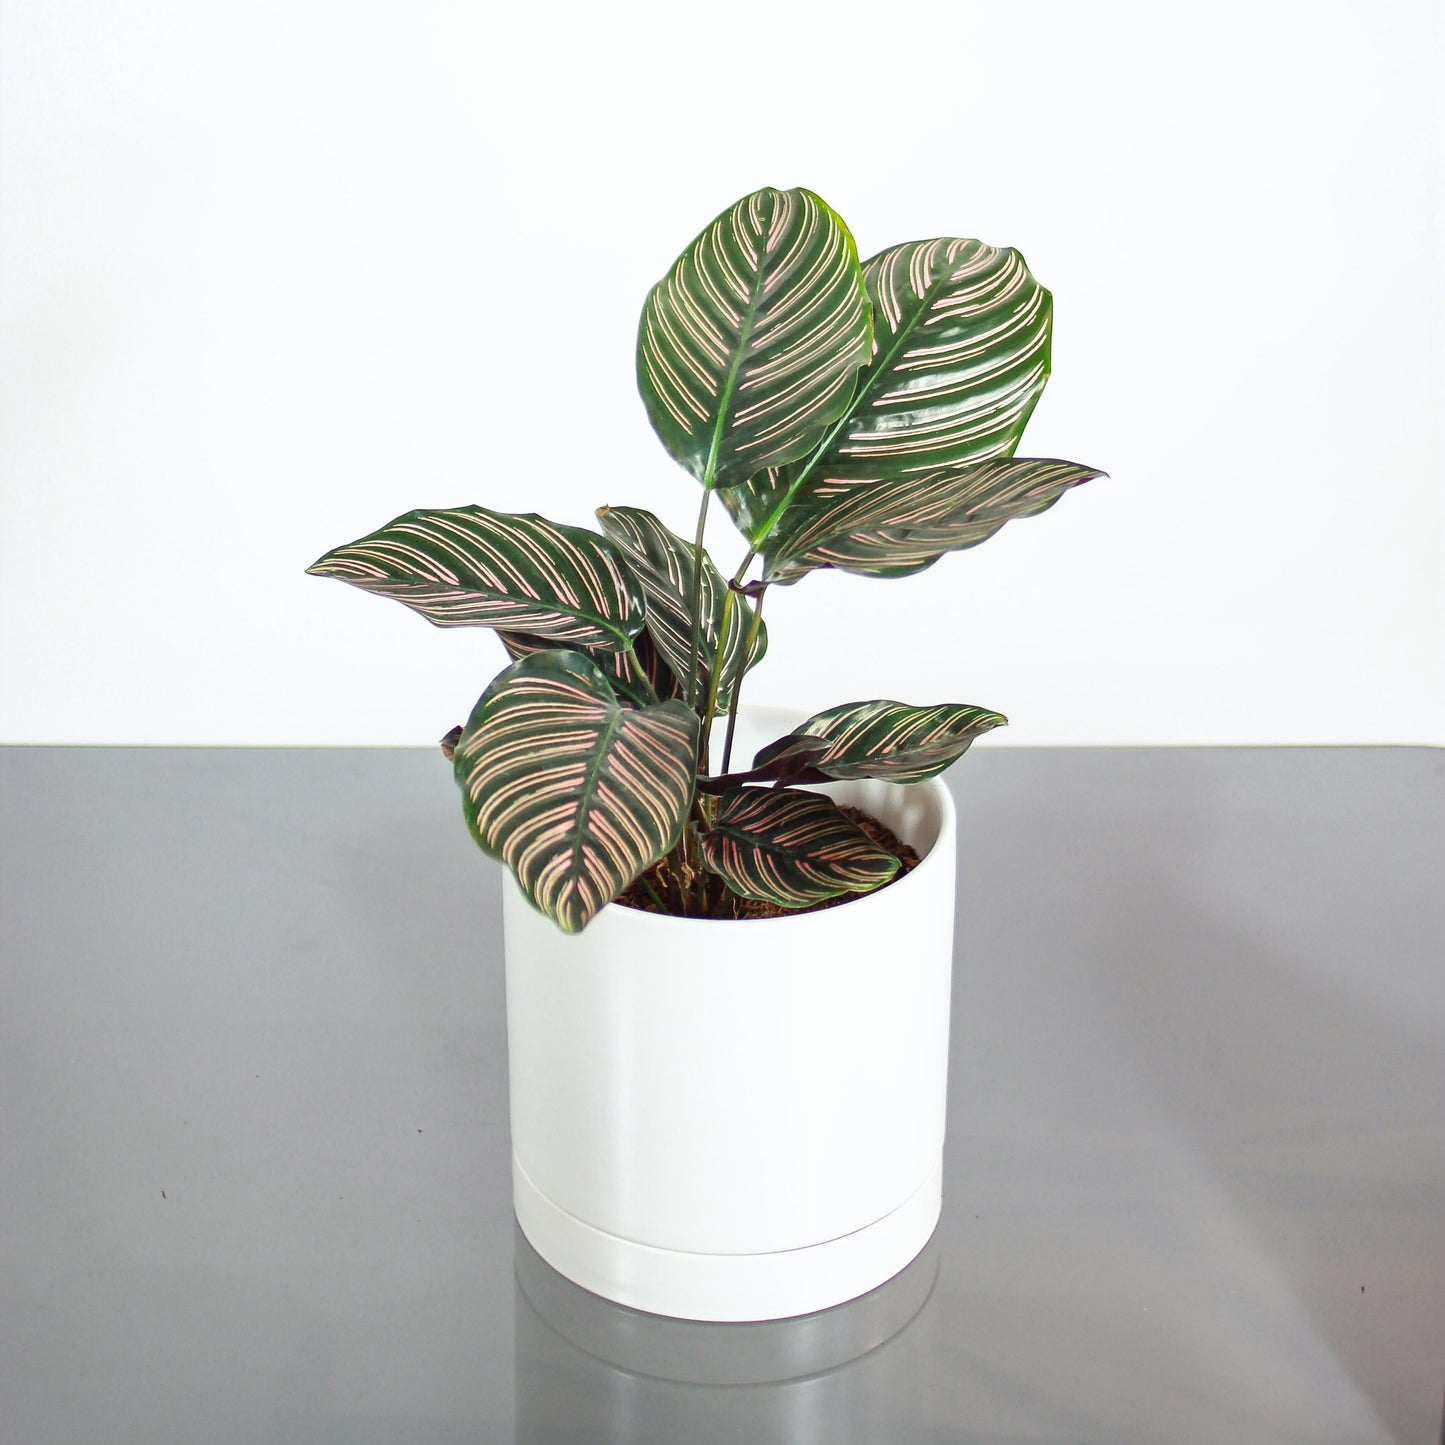 Pinstripe Calathea (Goeppertia ornata) in a 4 inch pot. Indoor plant for sale by Promise Supply for delivery and pickup in Toronto